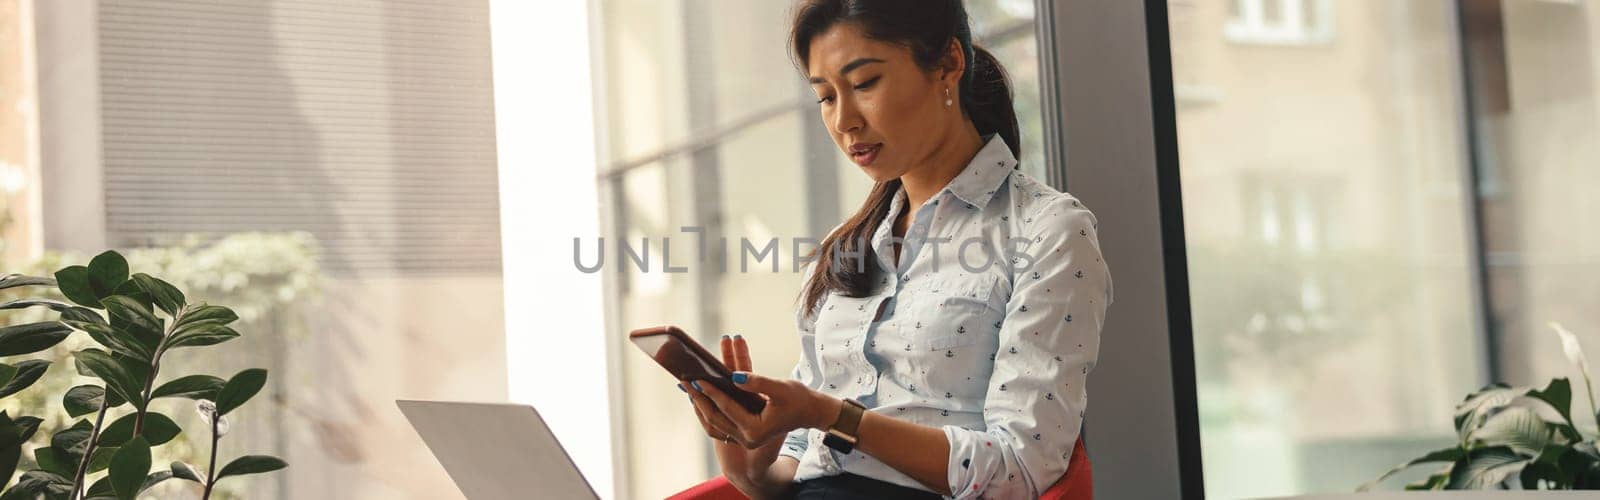 Focused business woman looking on phone while working on laptop in office by Yaroslav_astakhov